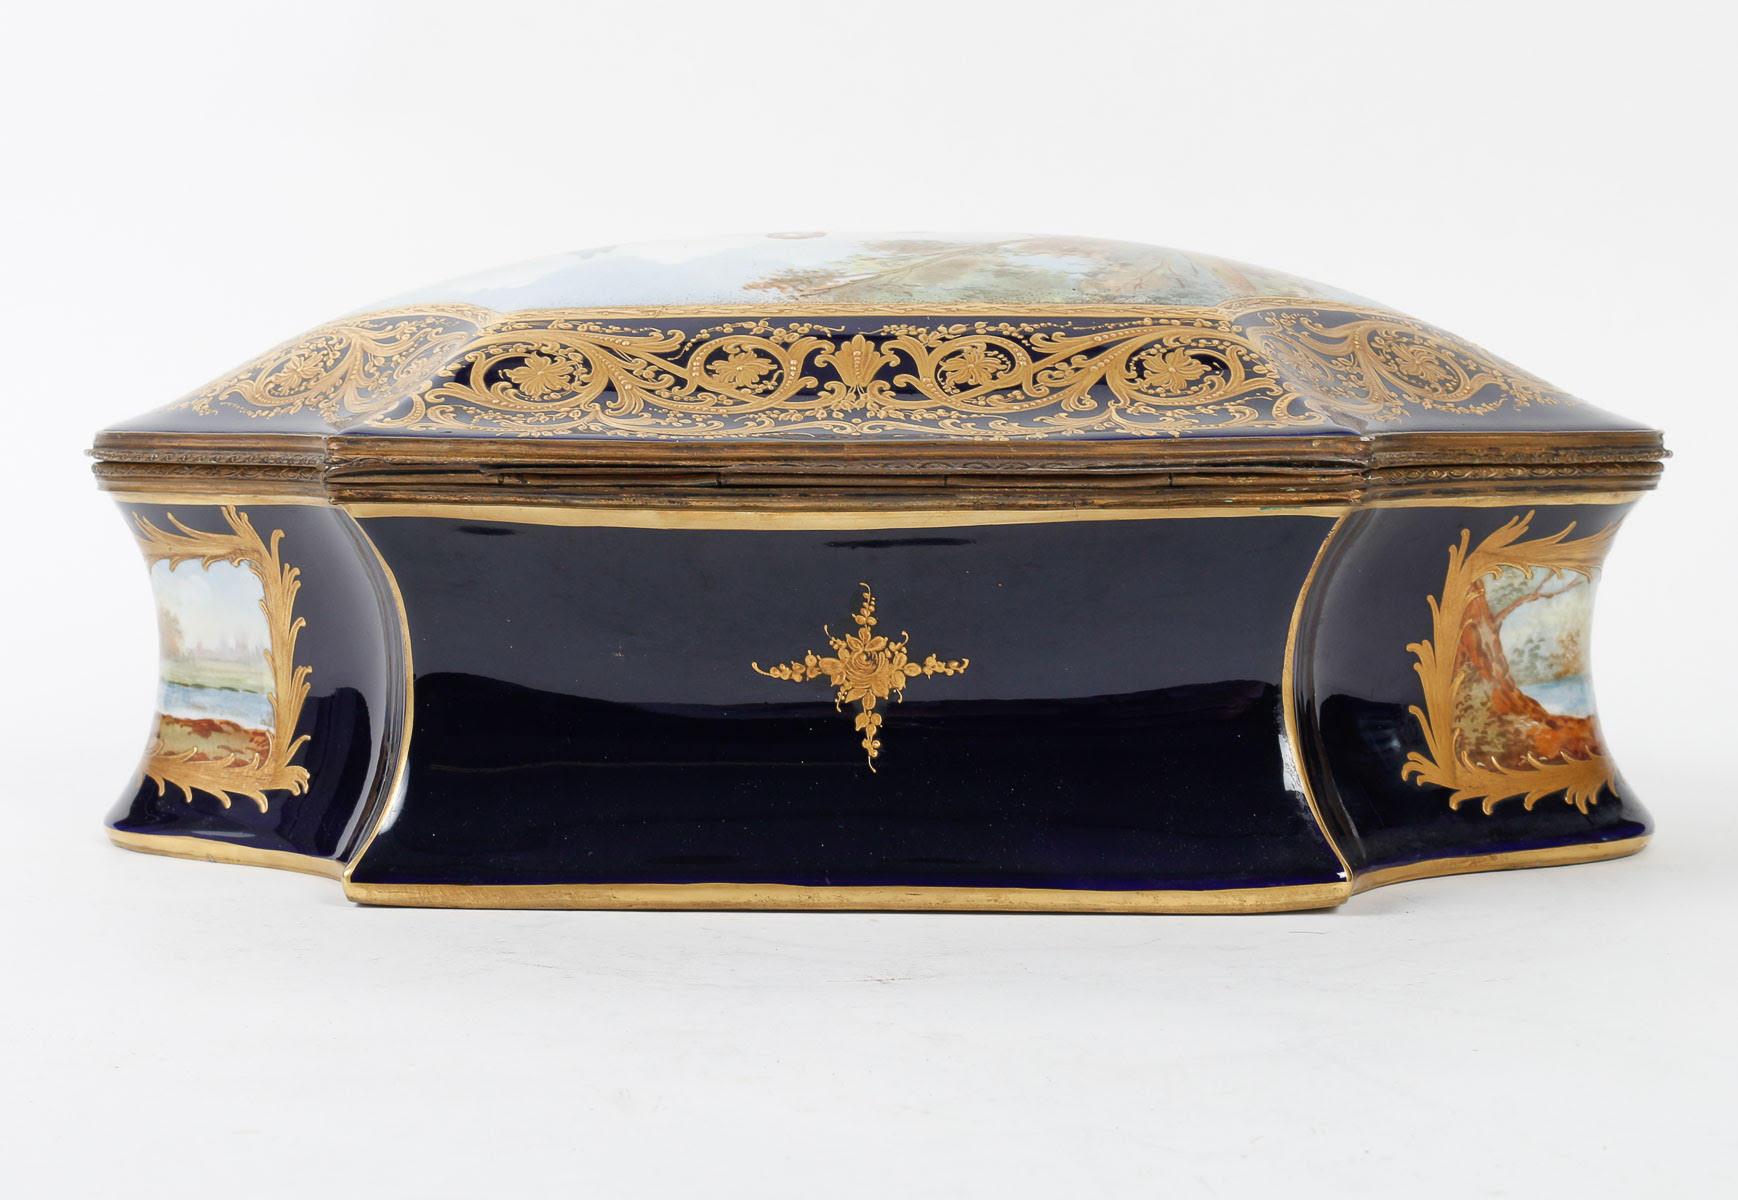 Porcelain Large Jewellery Box in the Taste of Sèvres, 19th Century.